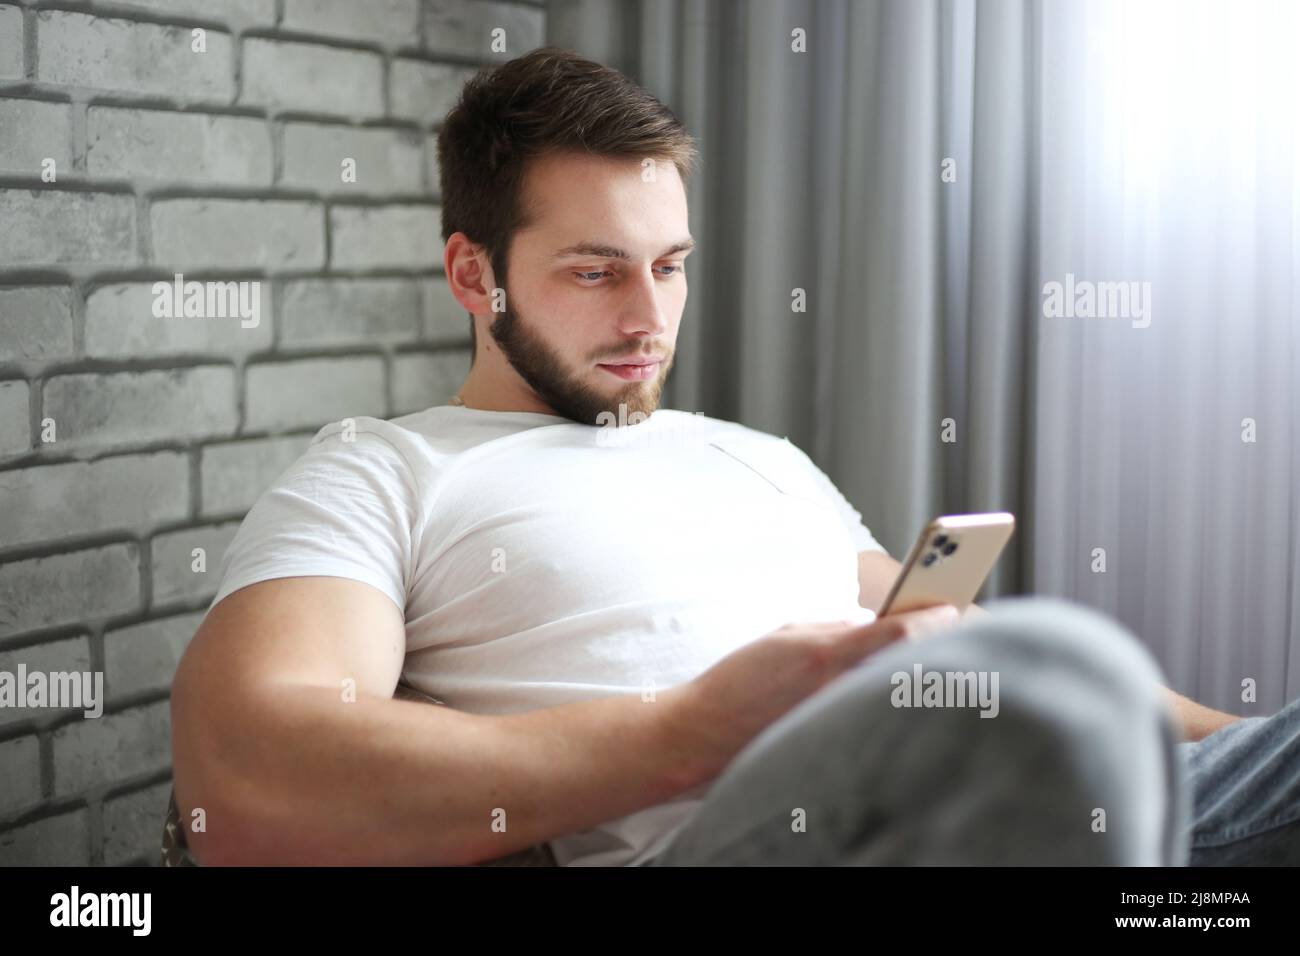 A young man of athletic build in a white T-shirt sits on a cushion chair and looks intently into smartphone Stock Photo